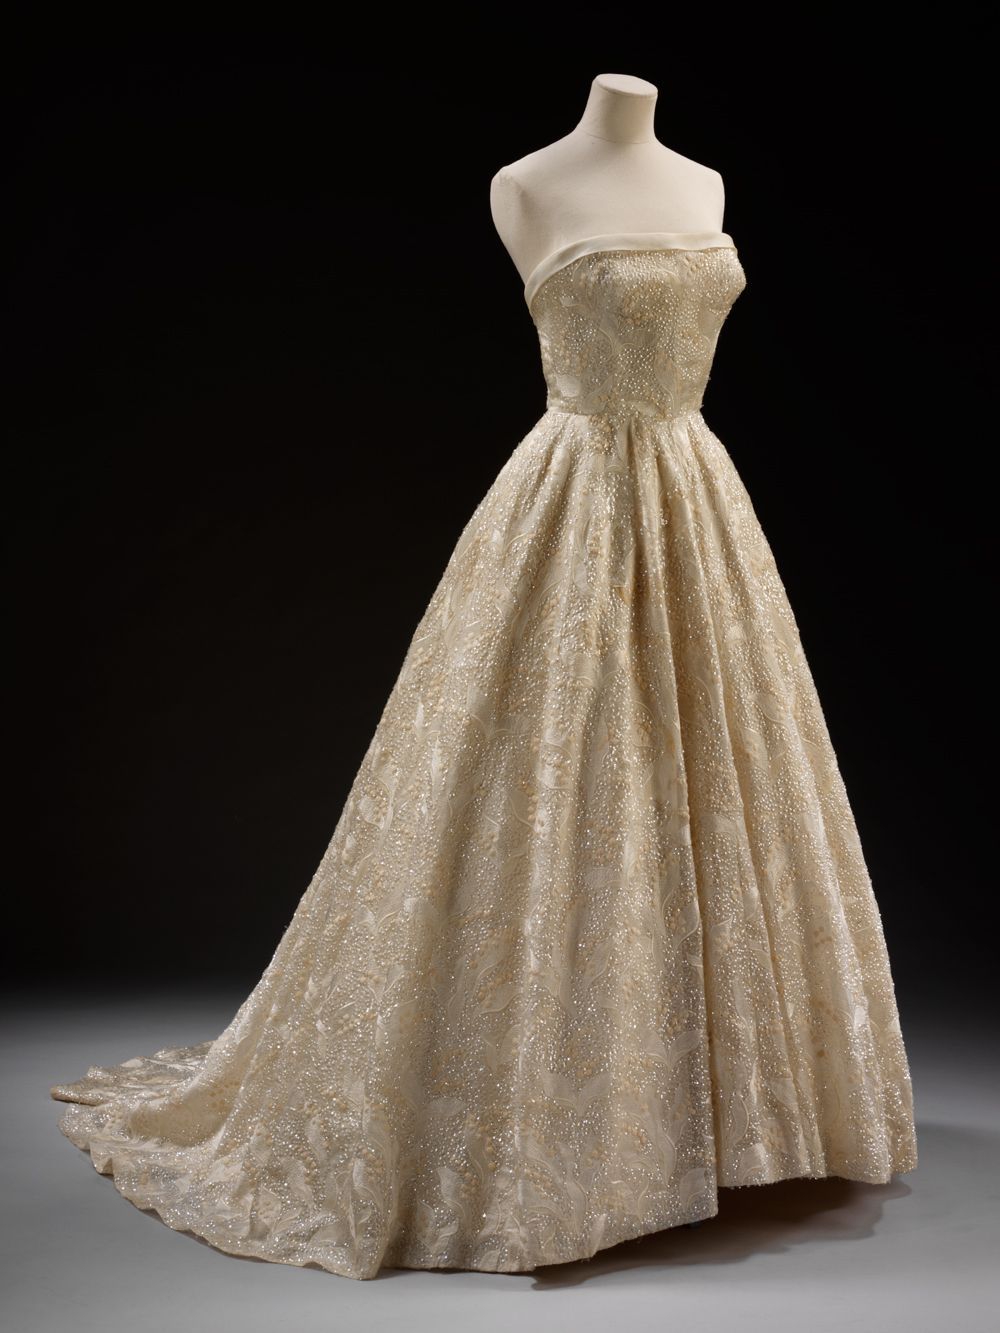 Evening dress by Givenchy Evening dress ‘Les Muguets’ (Lilies of the Valley) Designed by Hubert de Givenchy (born 1927) Paris,